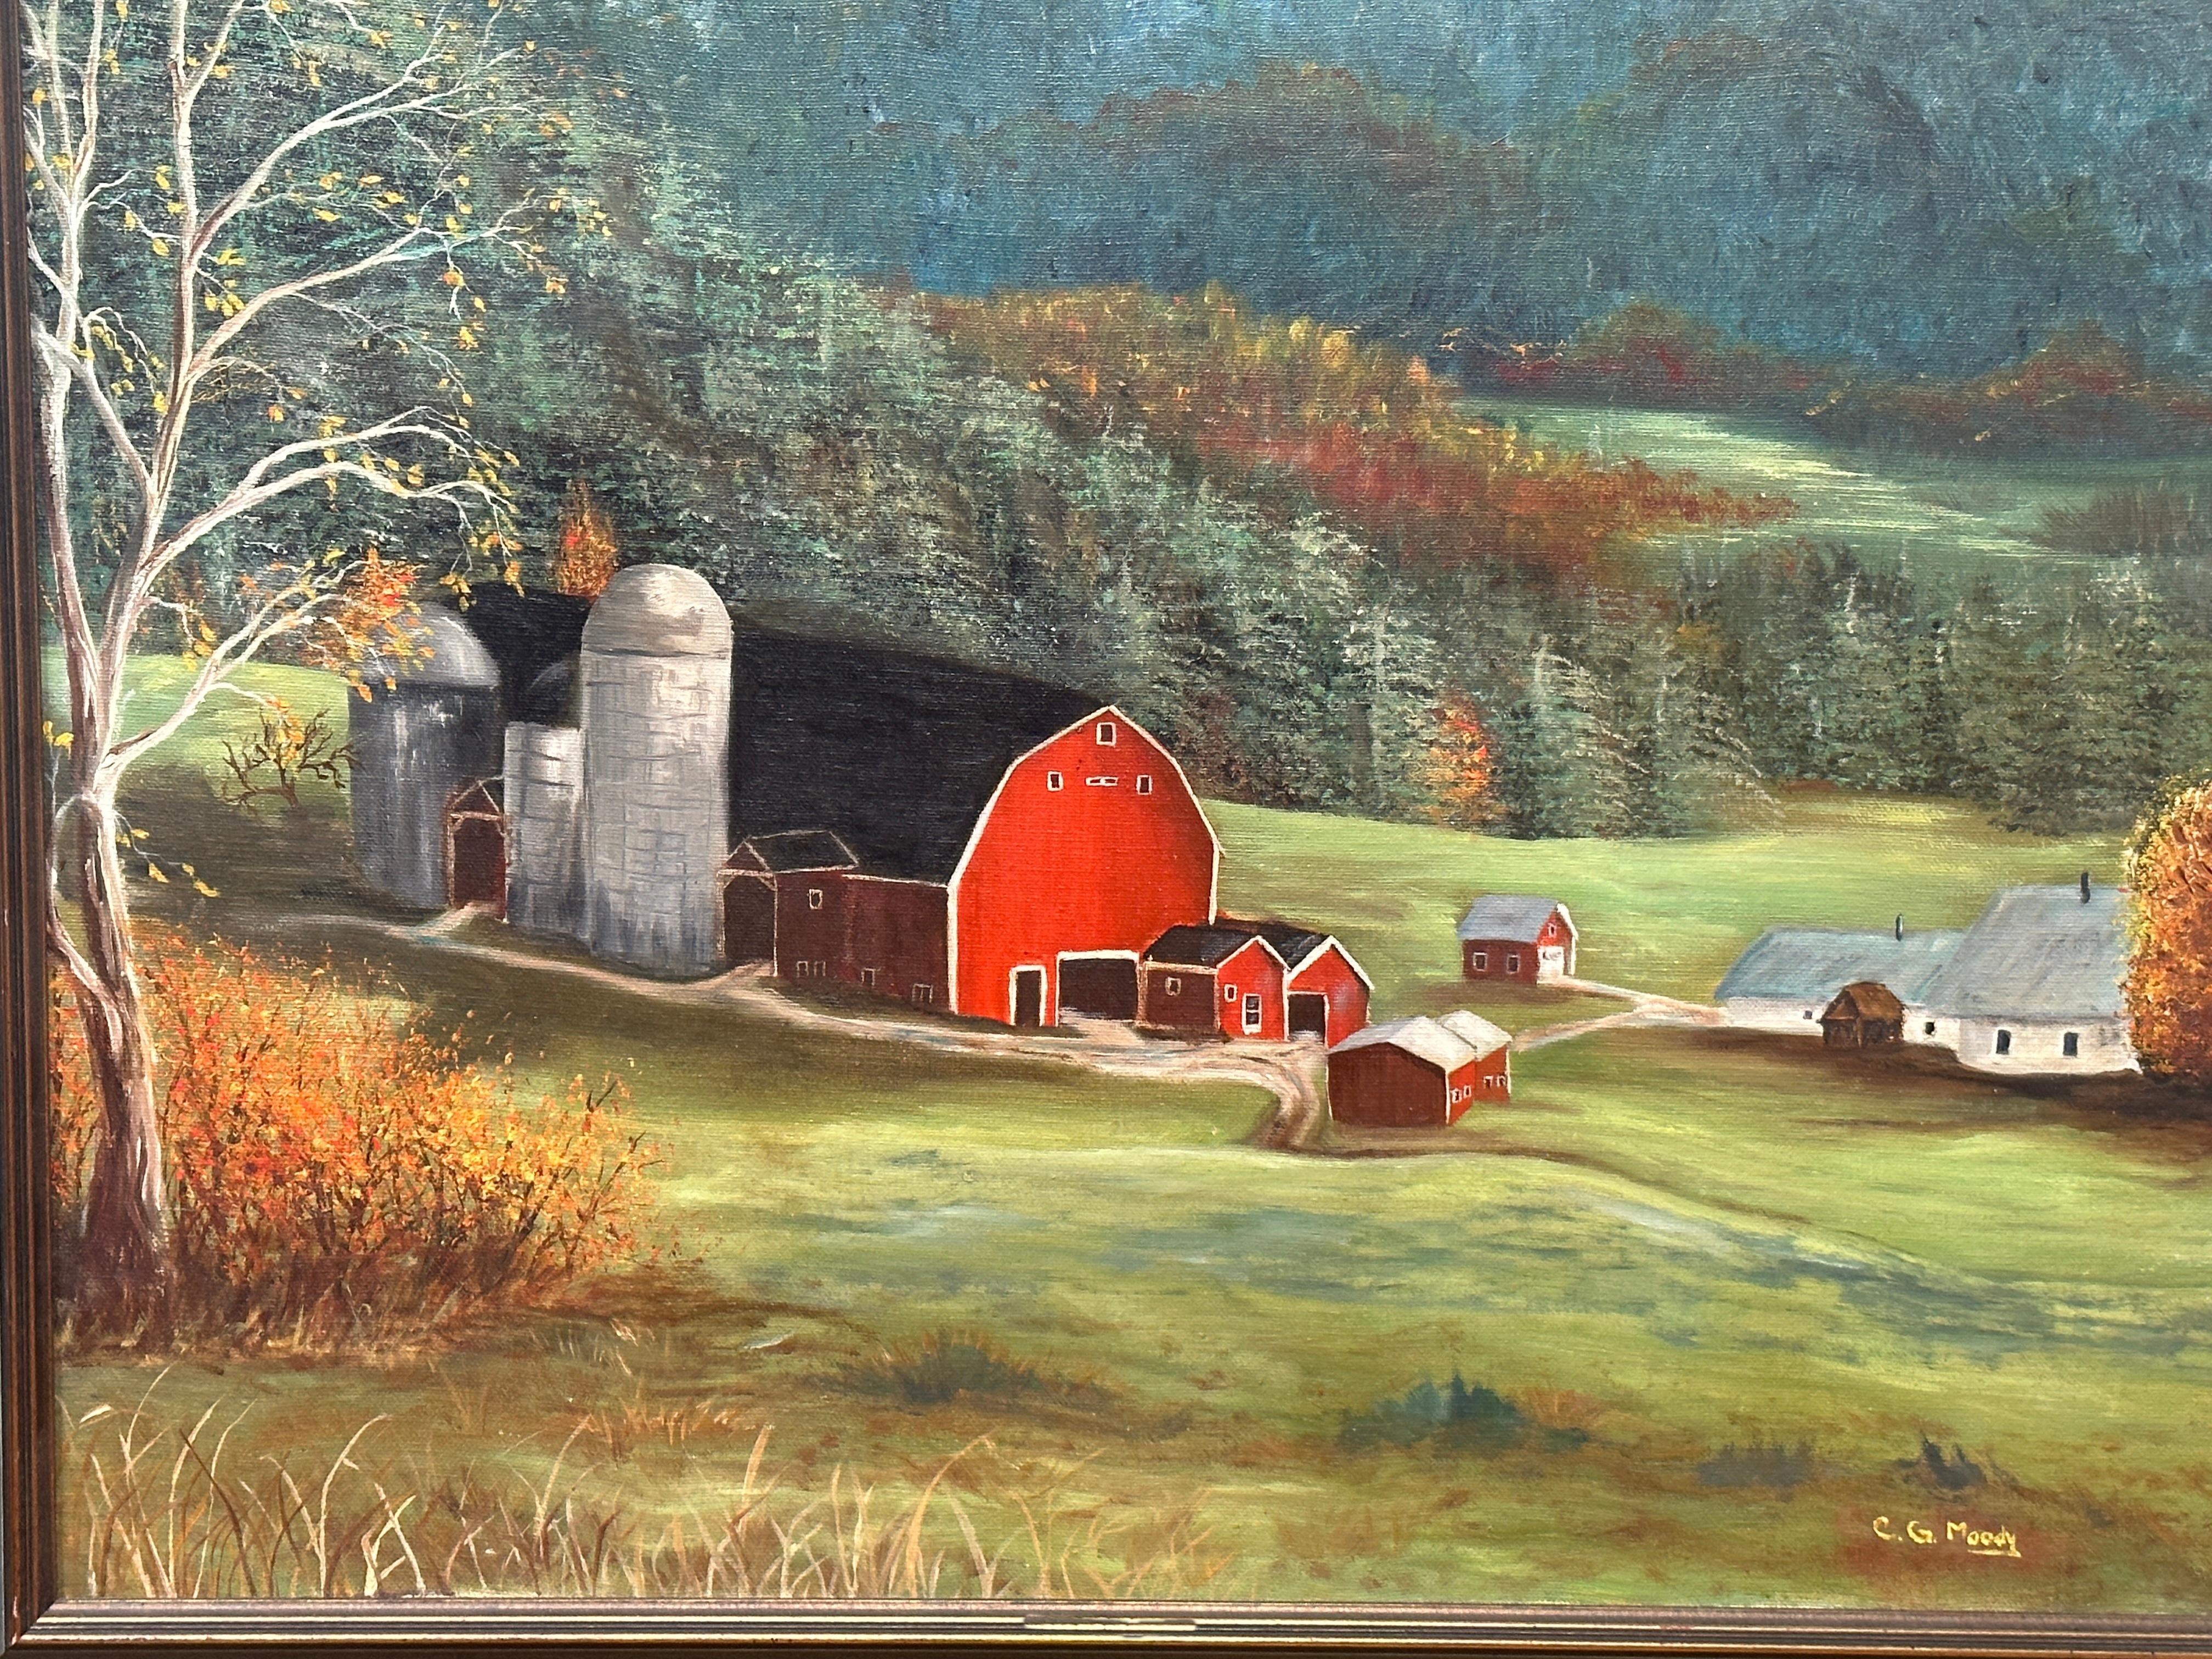 Oil painting on canvas proudly signed C. G. Moody untraceable painter!
It sits in a very nice and matching frame chosen by the artist.

In this impressionist painting from the 1960s, depicting a farm with a silo in New England.
 Moody enhances